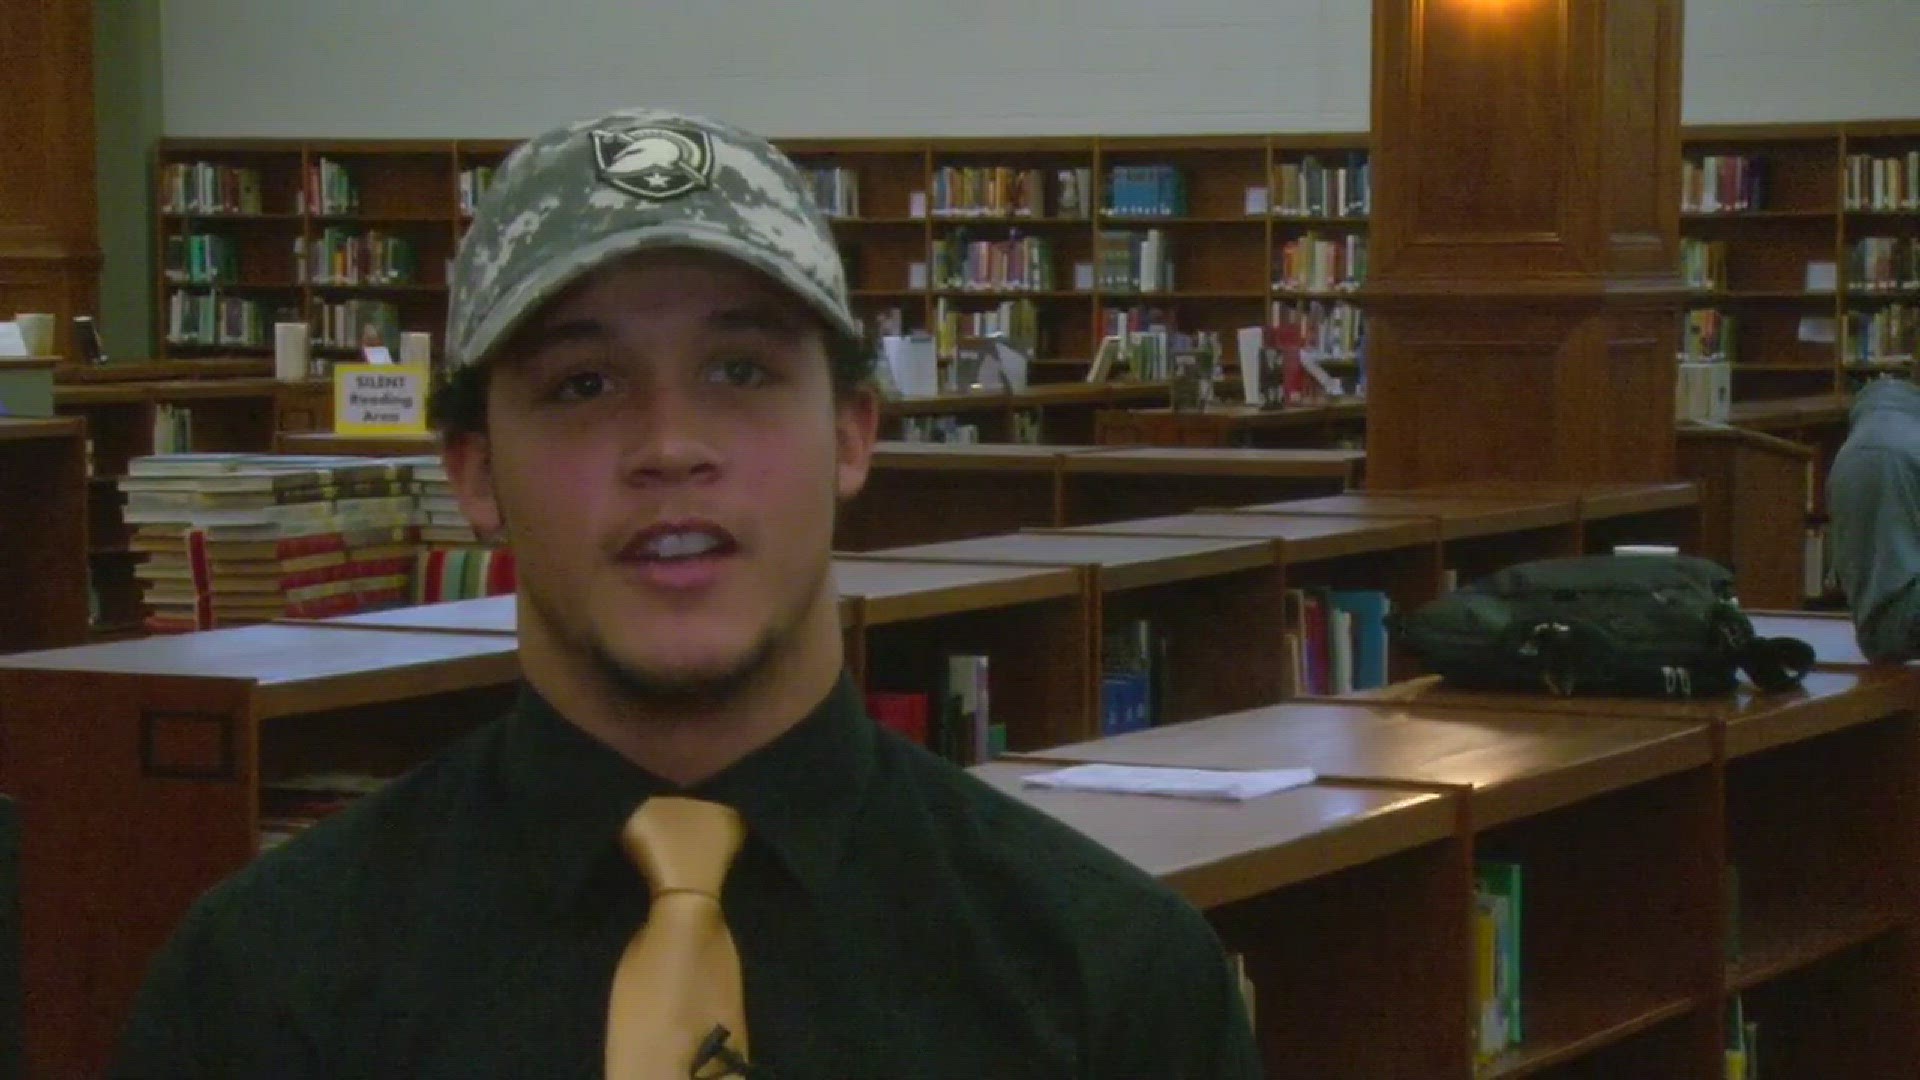 Stephens will continue his football career at Army.